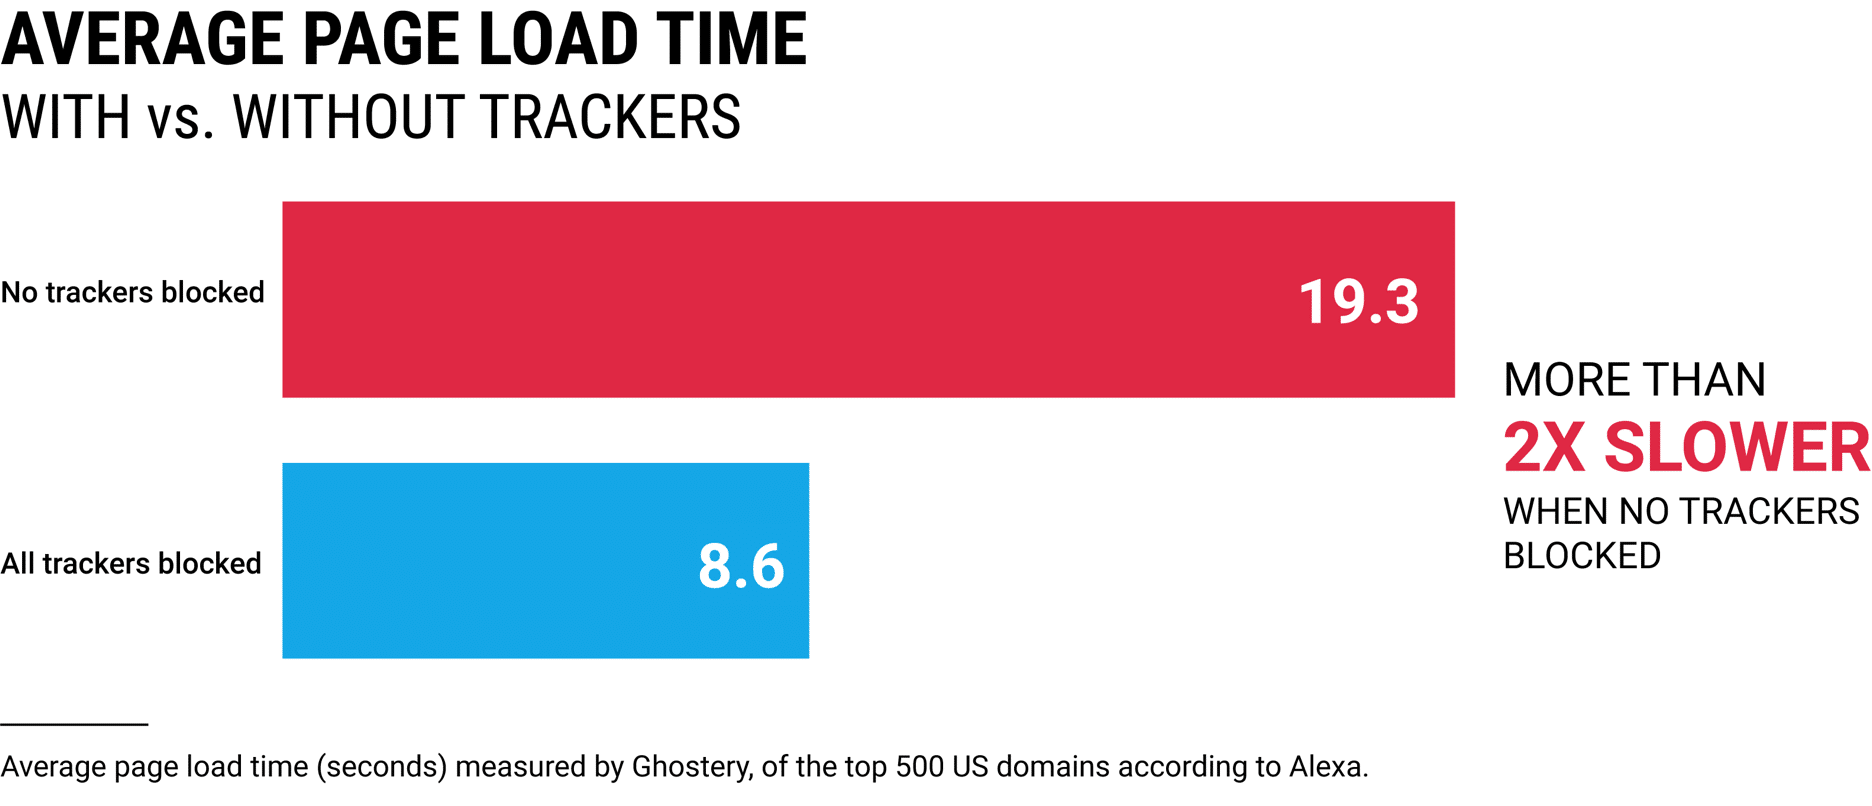 Load time with trackers" width="1872" height="806" srcset="http://webypress.fr/wp-content/uploads/2019/08/1566286030_276_Comment-accelerer-votre-site-WordPress-Guide-Ultimate-2019.png 1872w, https://kinsta.com/wp-content/uploads/2018/11/load-time-with-trackers-300x129.png 300w, https://kinsta.com/wp-content/uploads/2018/11/load-time-with-trackers-768x331.png 768w, https://kinsta.com/wp-content/uploads/2018/11/load-time-with-trackers-1024x441.png 1024w, https://kinsta.com/wp-content/uploads/2018/11/load-time-with-trackers-610x263.png 610w" sizes="(max-width: 1872px) 100vw, 1872px